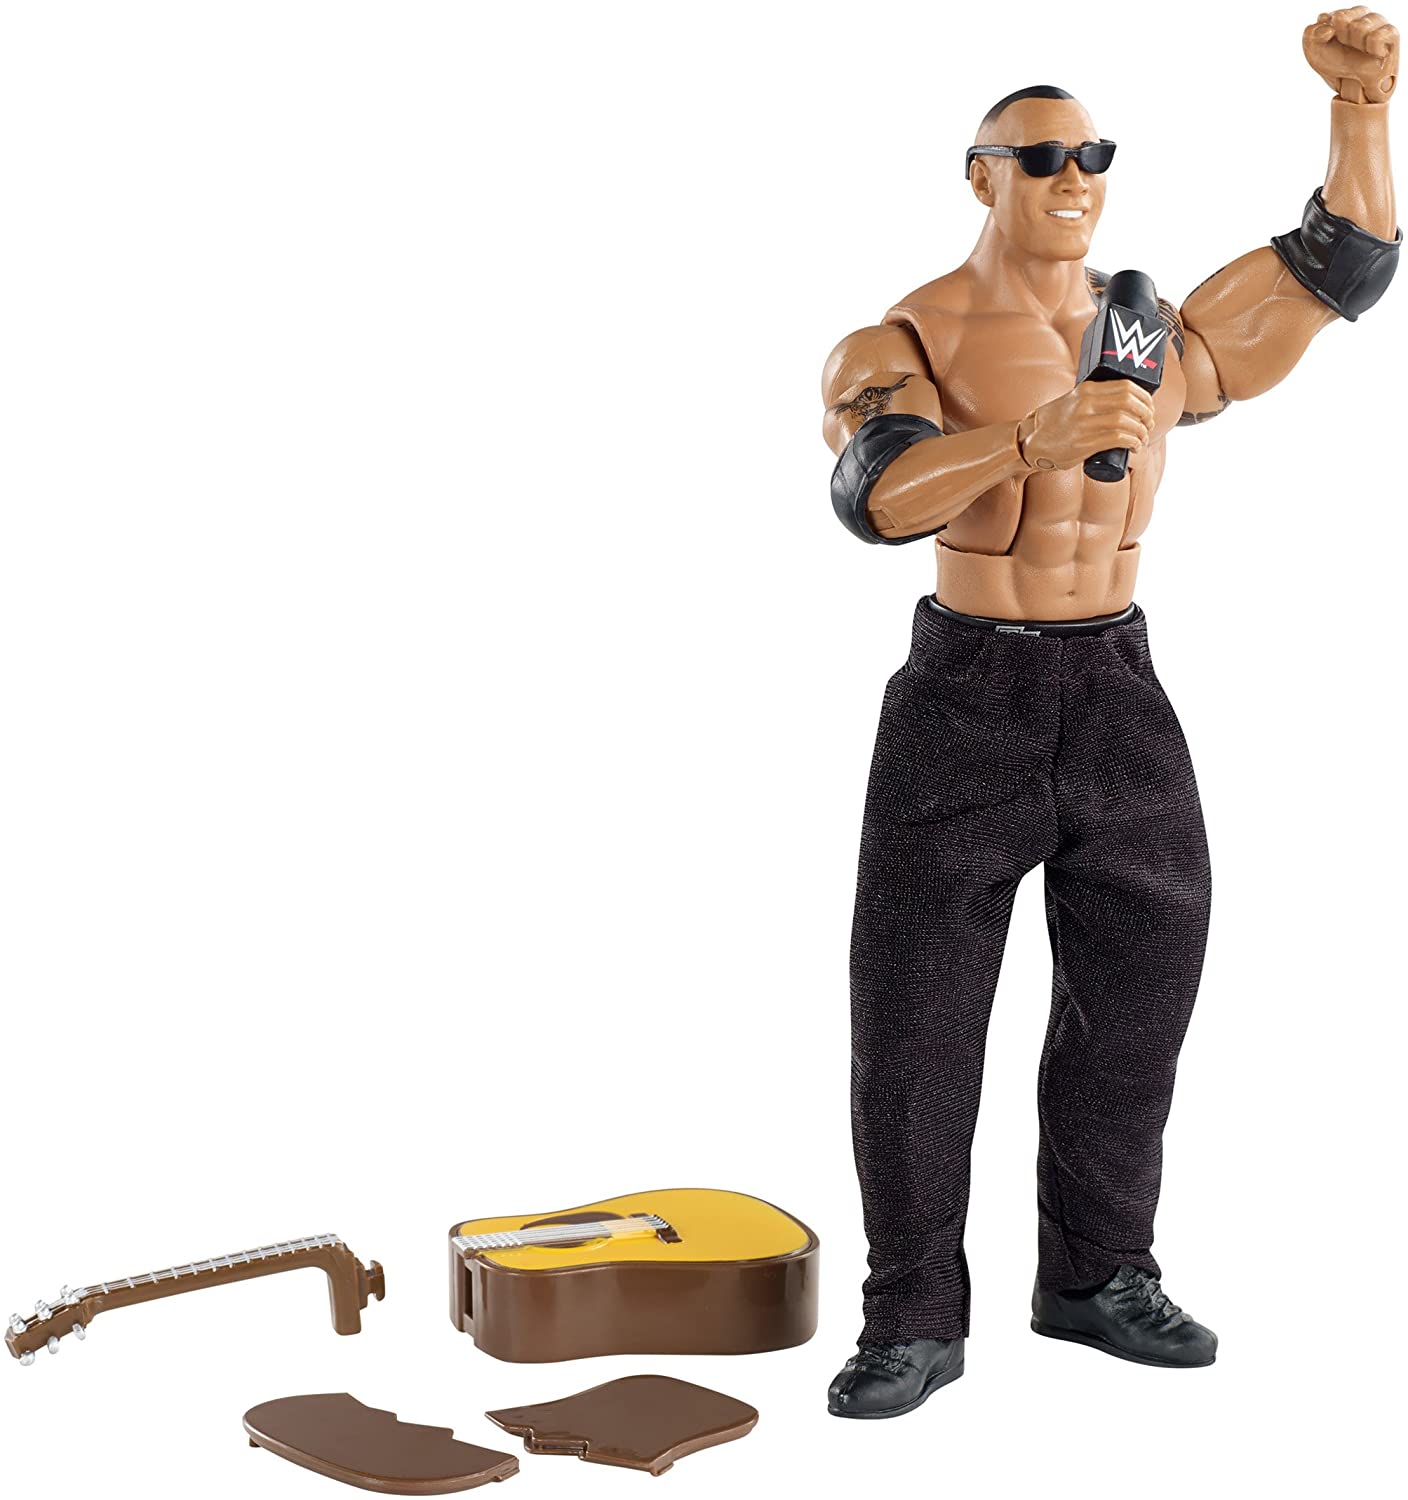 WWE Mattel Elite Collection Series 31 The Rock